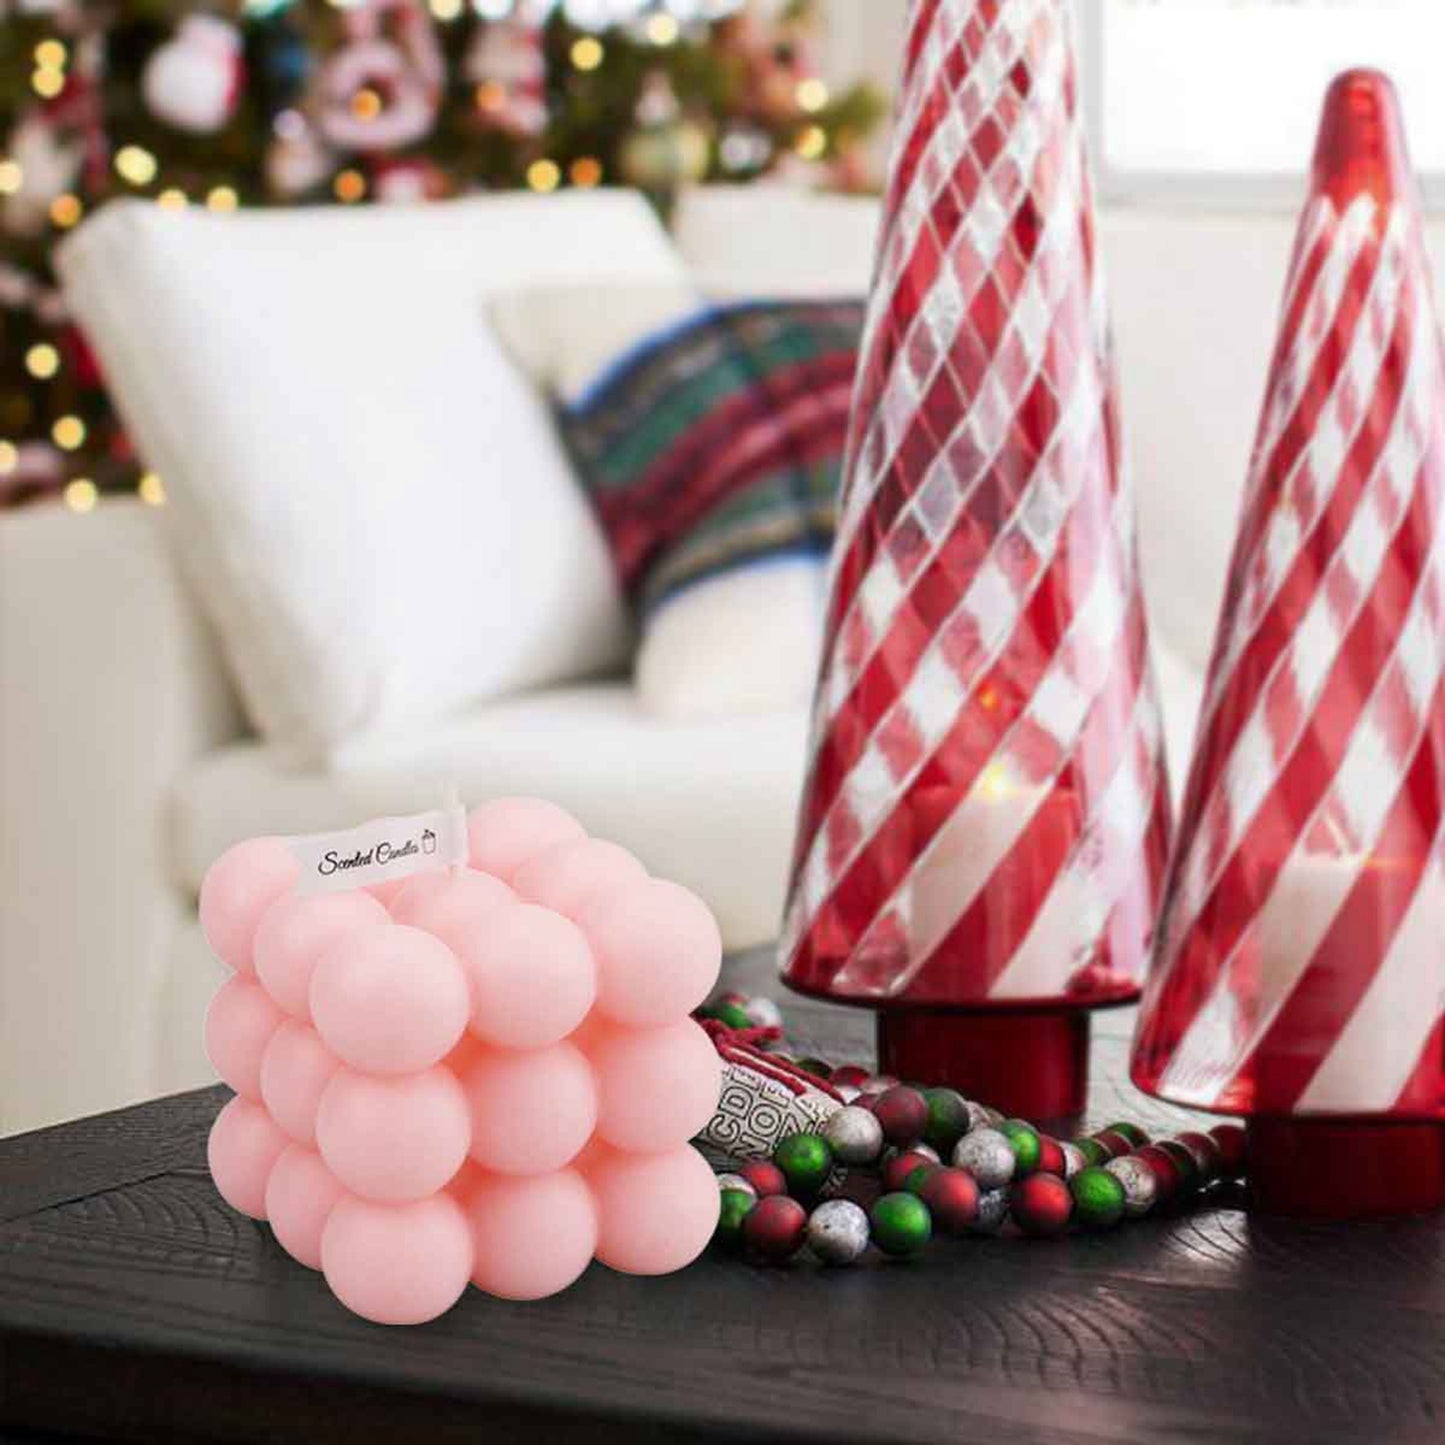 Christmas home scented bubble cube candle, uniquely romantic and aesthetic